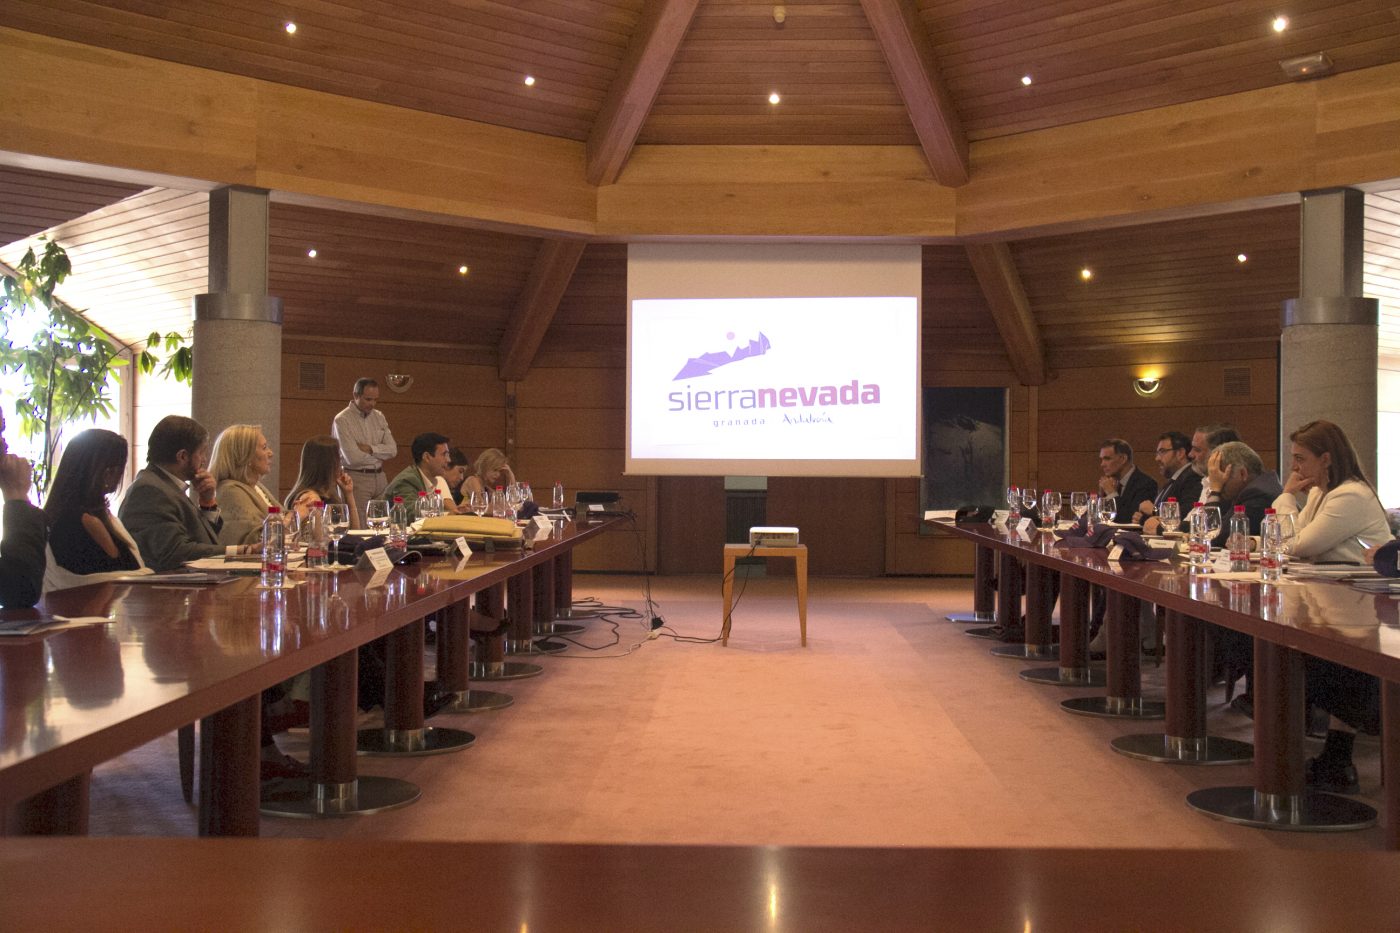 Administrative Council of CETURSA in meeting. Sierra Nevada: Cetursa approves an investment of 10 million for the next season and addresses the installation of a new ski lift. Photo: CETURSA.